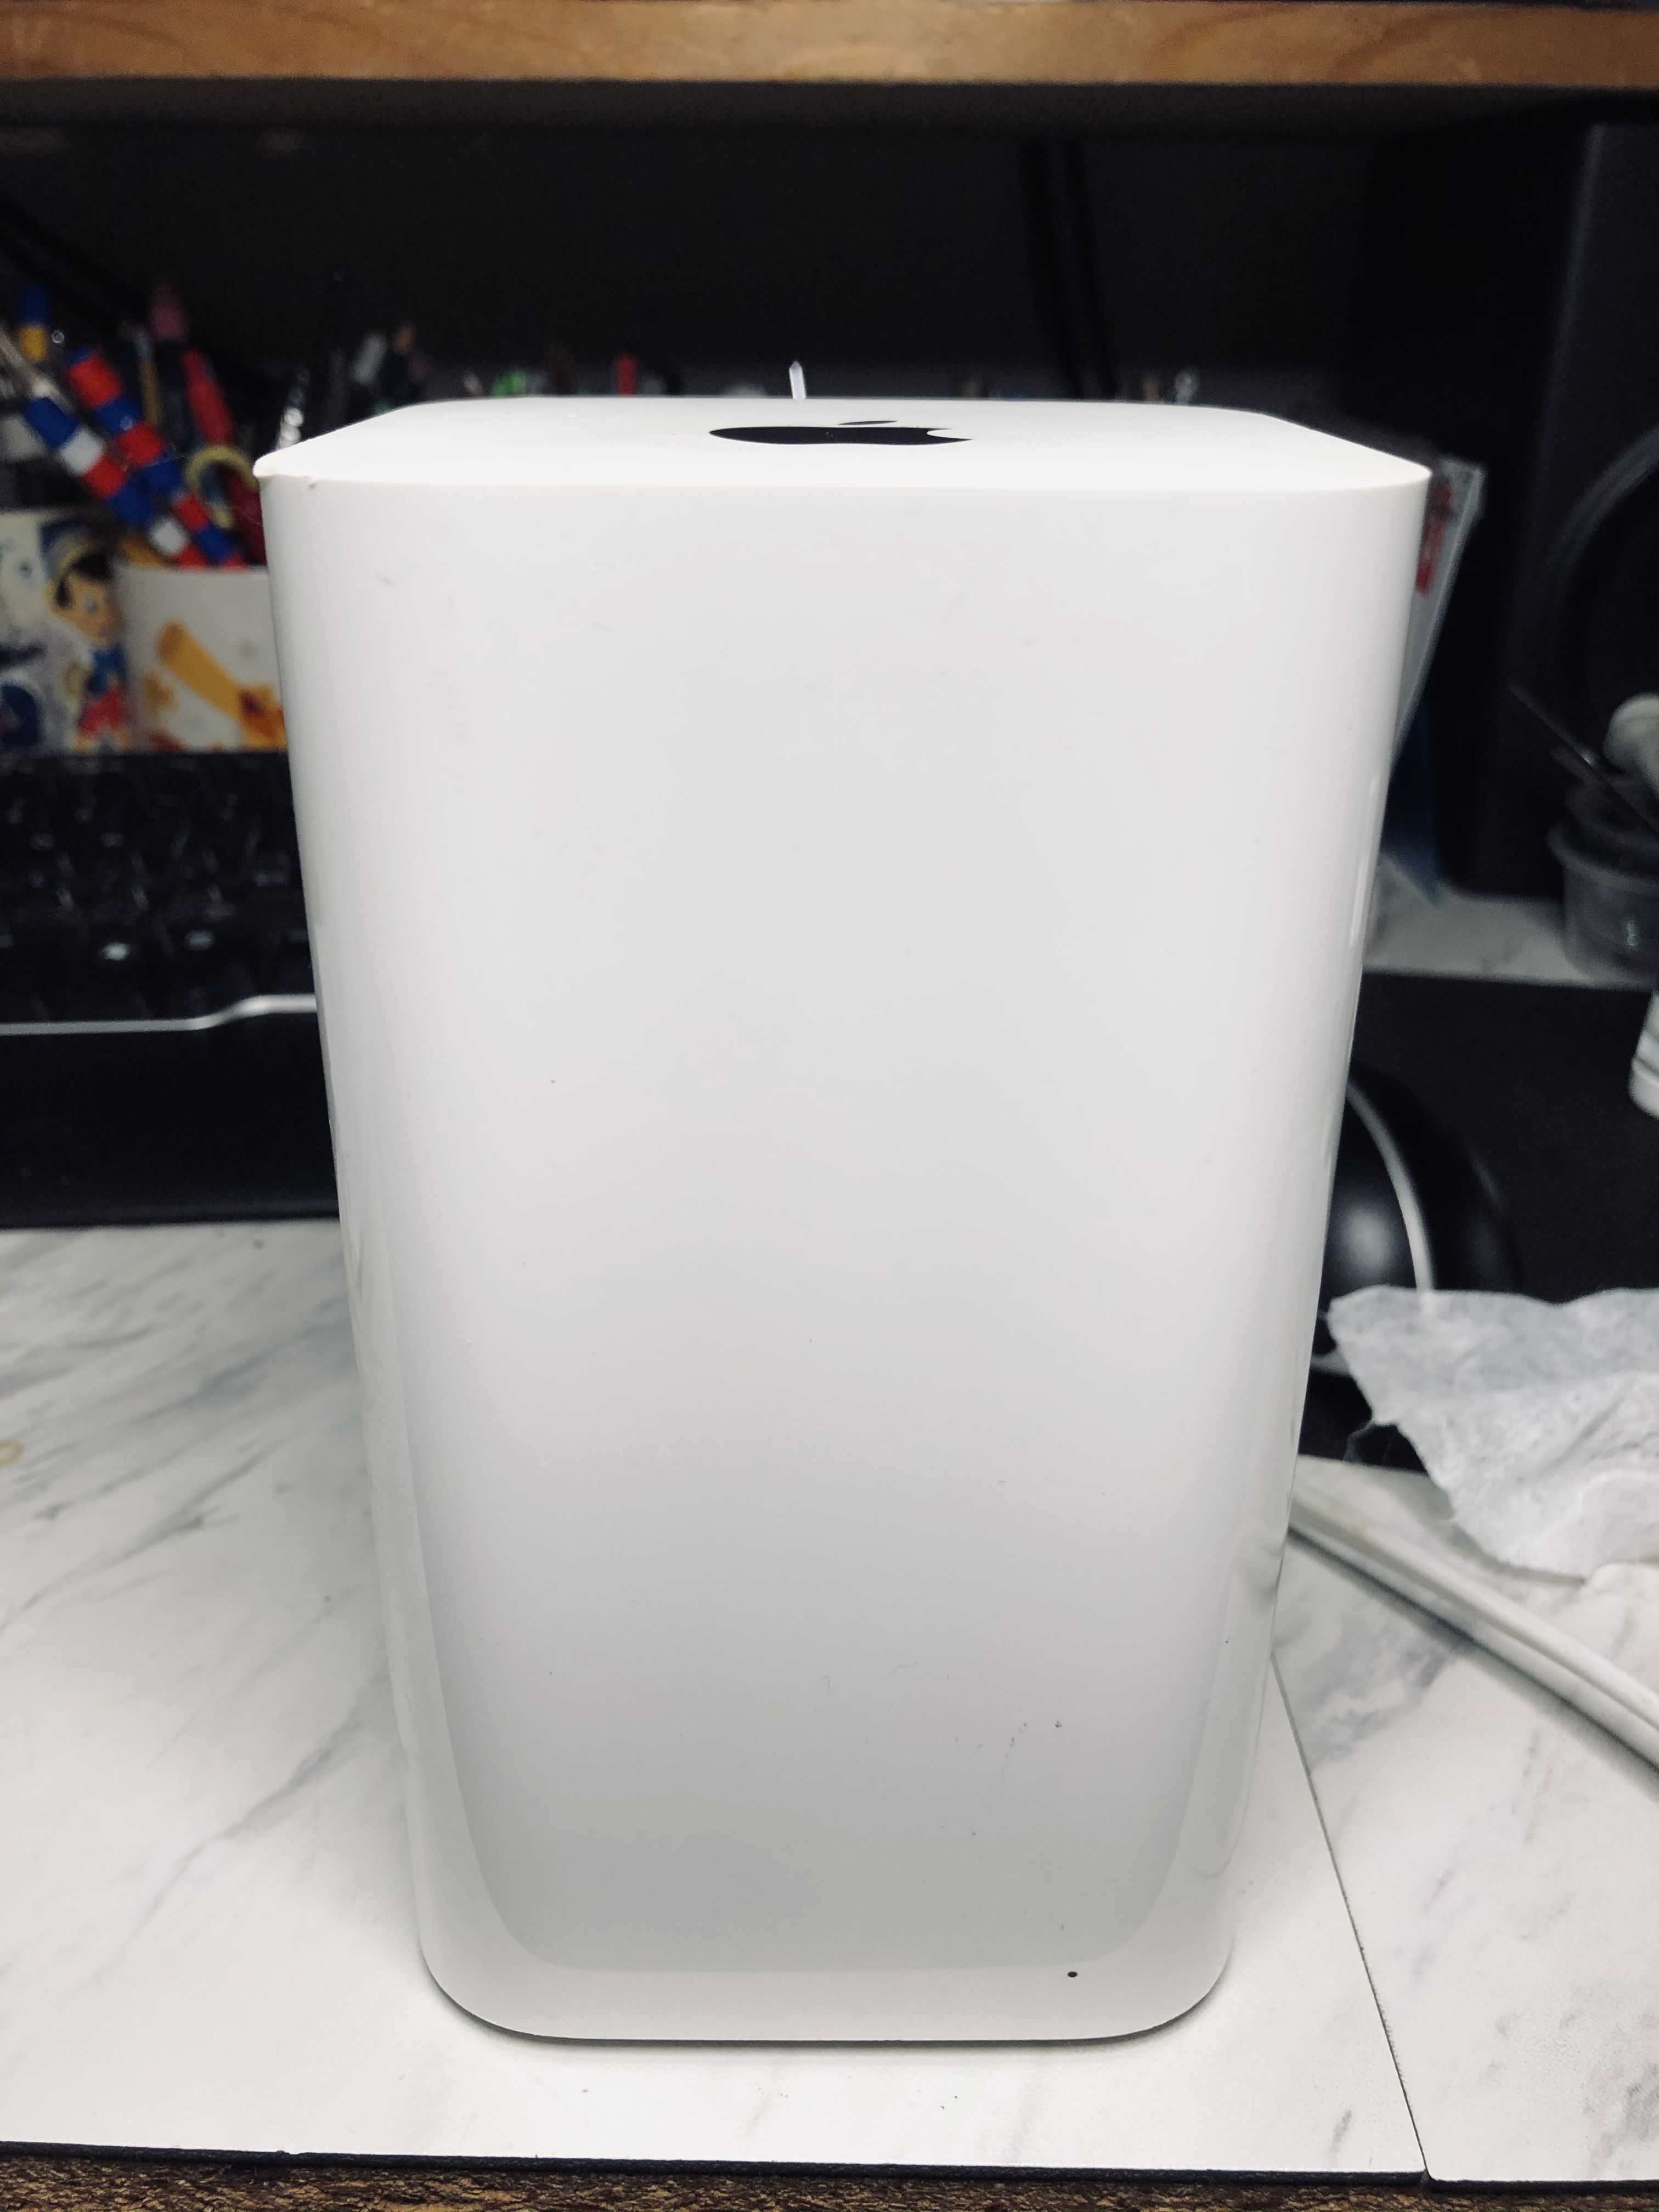 Apple A1521 AirPort Extreme Base Station Wireless Router (6th Gen)